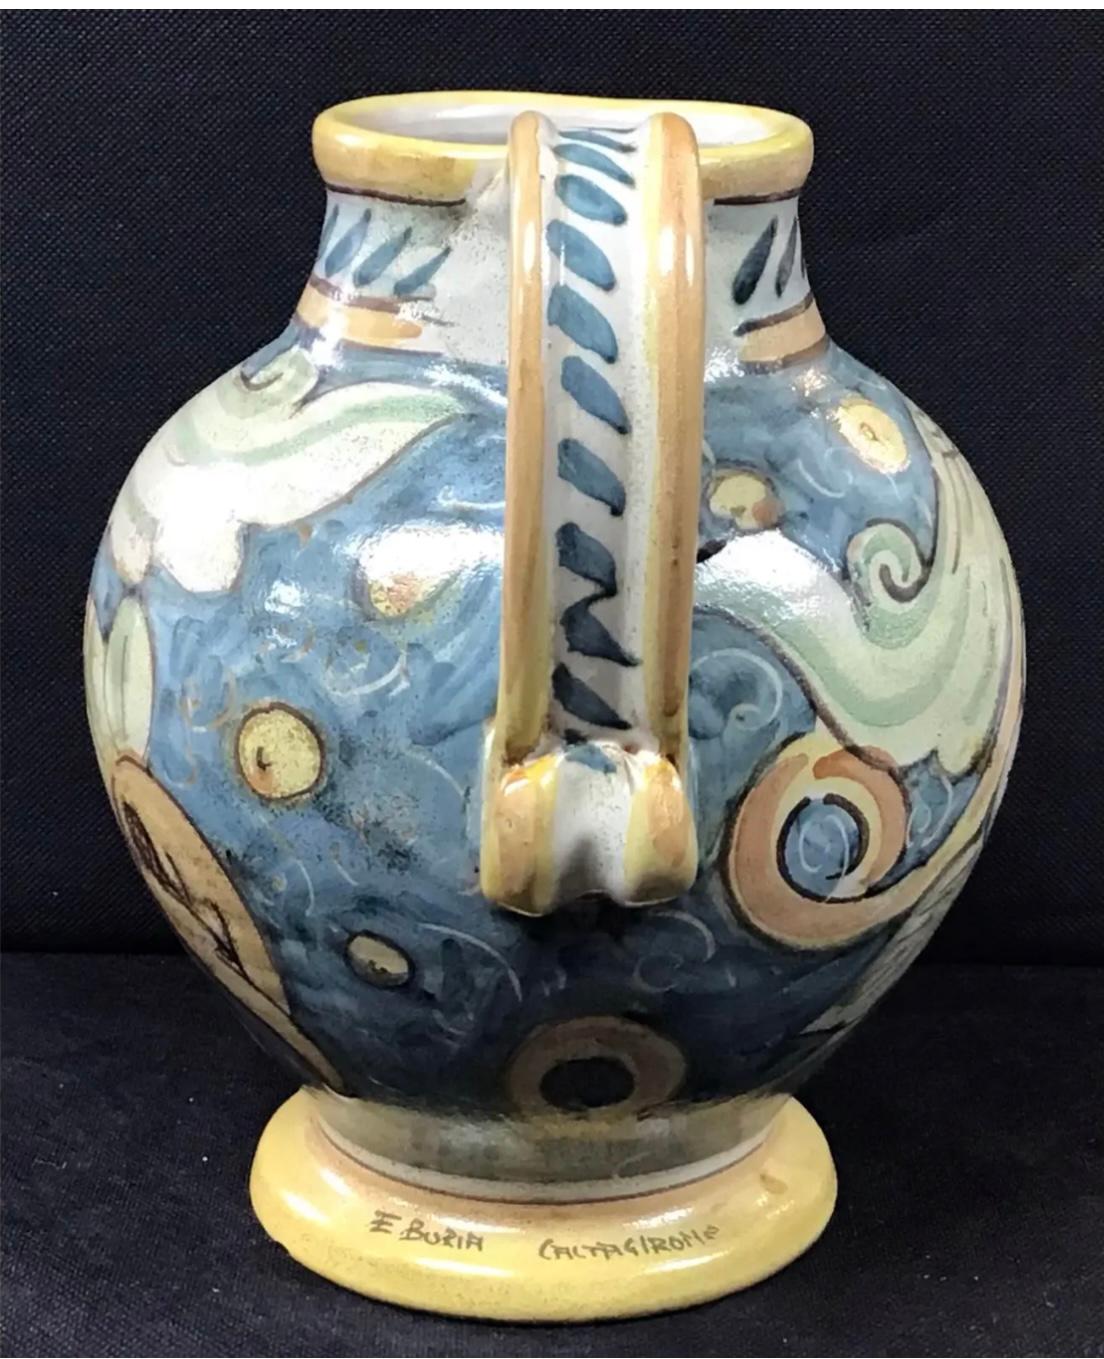 An impressively formed antique hand painted Italian Faenza Majolica ceramic vessel. Made in the early 1900s. The jug is decorated with colorful floral and abstract design. The vessel is in excellent condition for its age, without cracks. Signed on